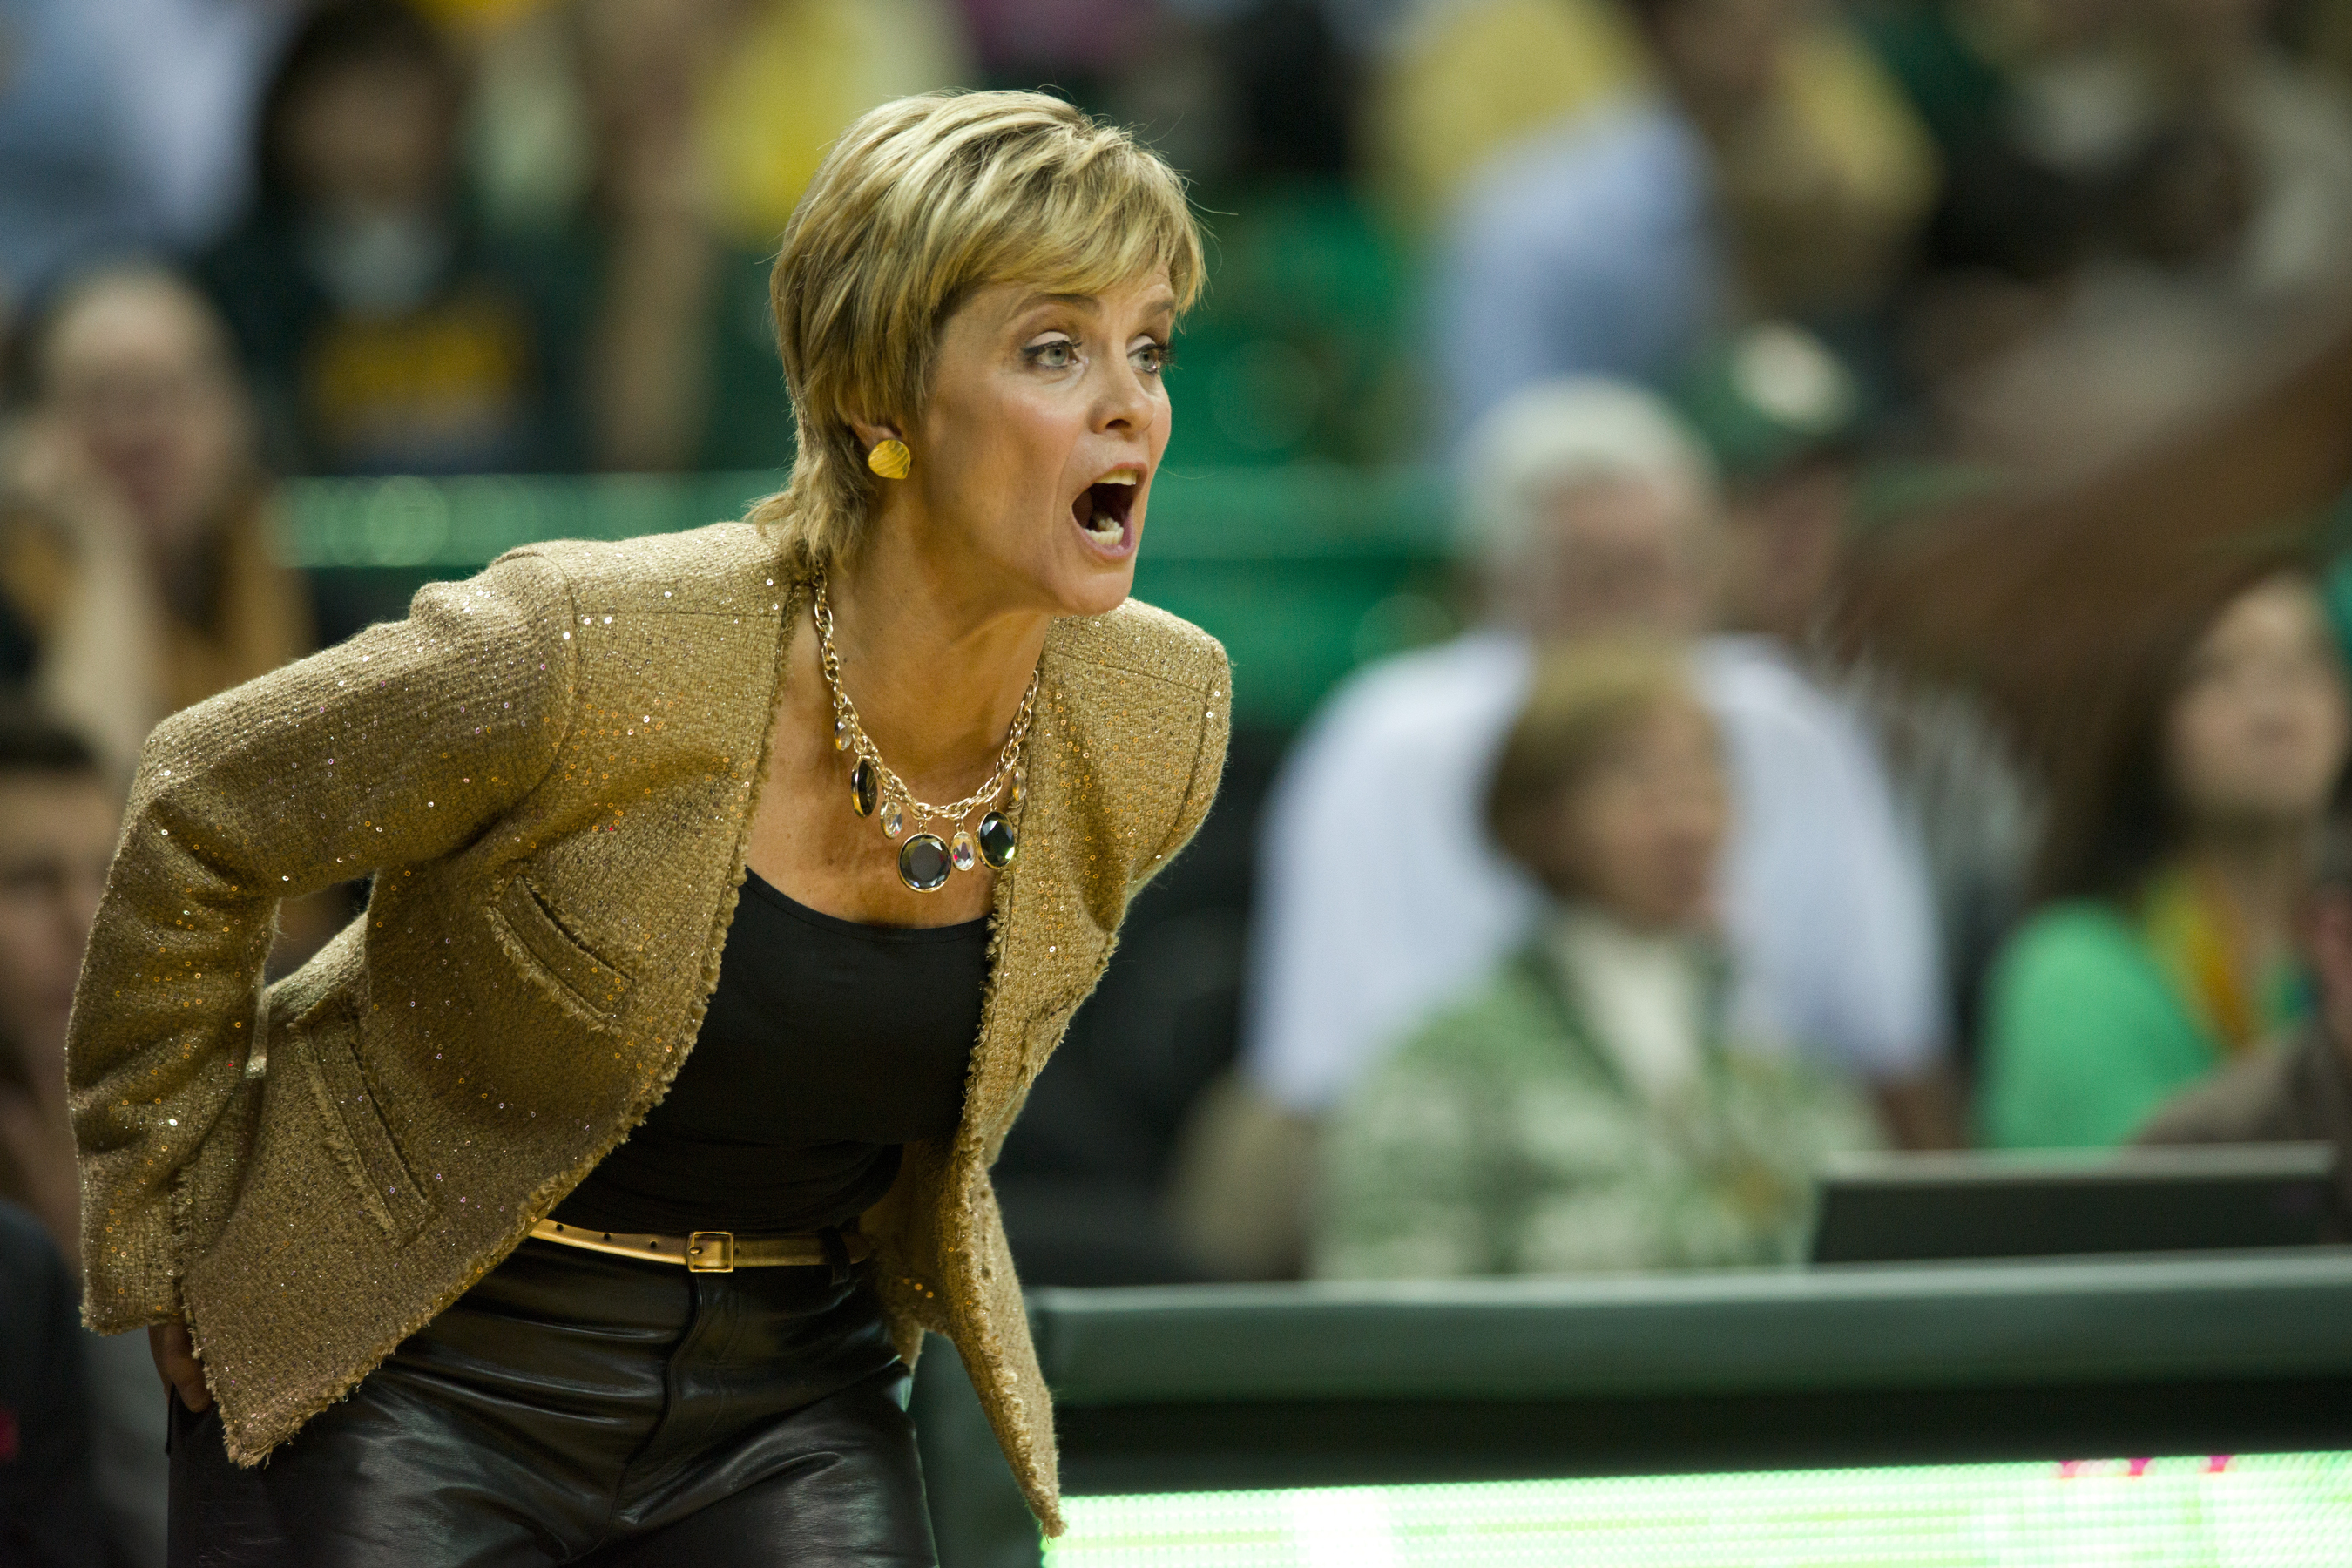 Baylor Women S Basketball Coach Kim Mulkey Apologizes For Sexual Assault Remarks Bleacher Report Latest News Videos And Highlights